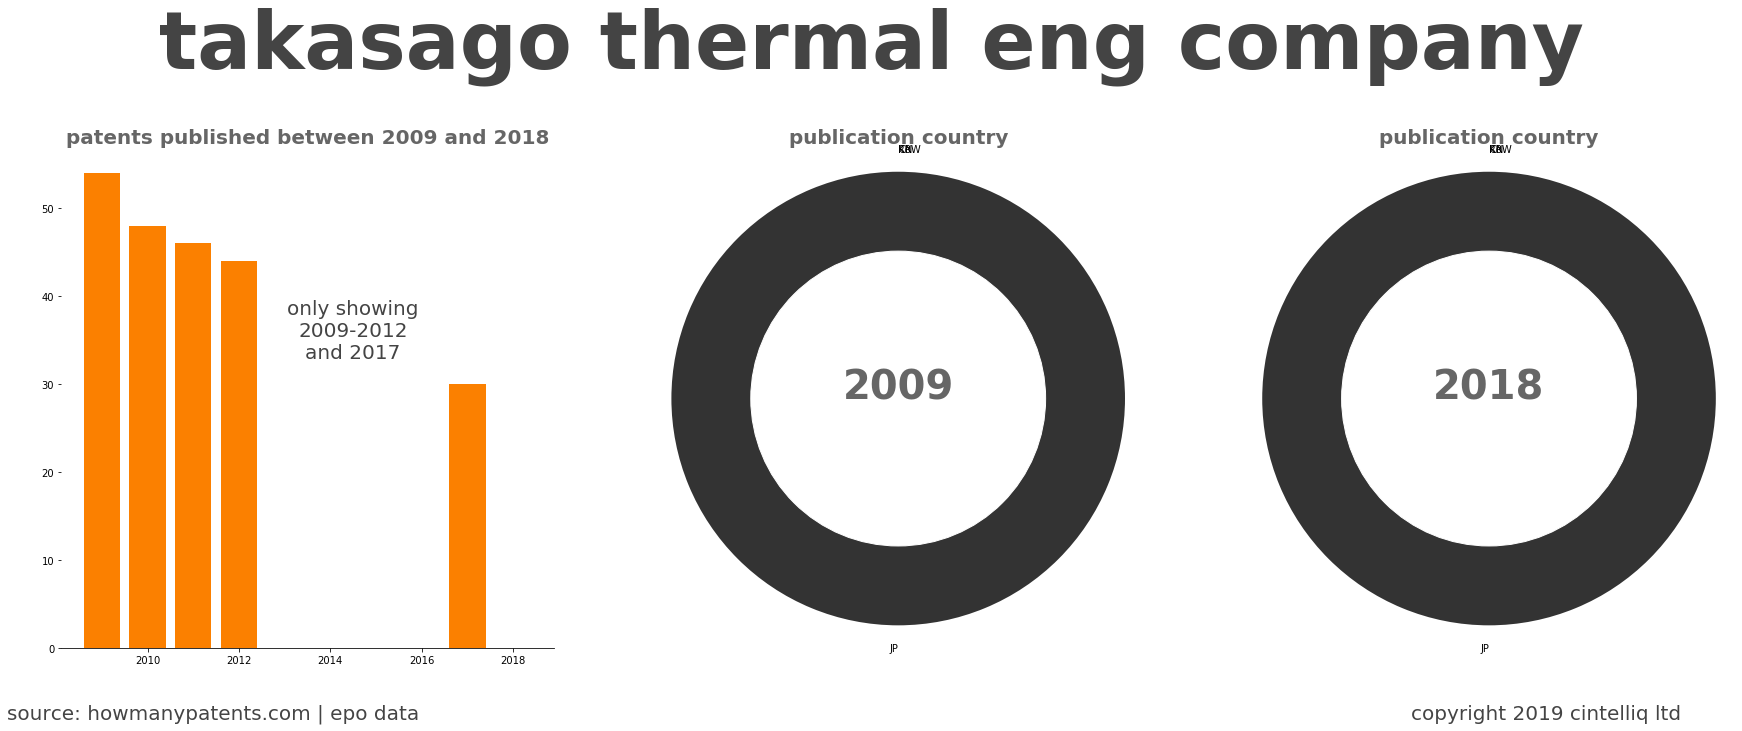 summary of patents for Takasago Thermal Eng Company